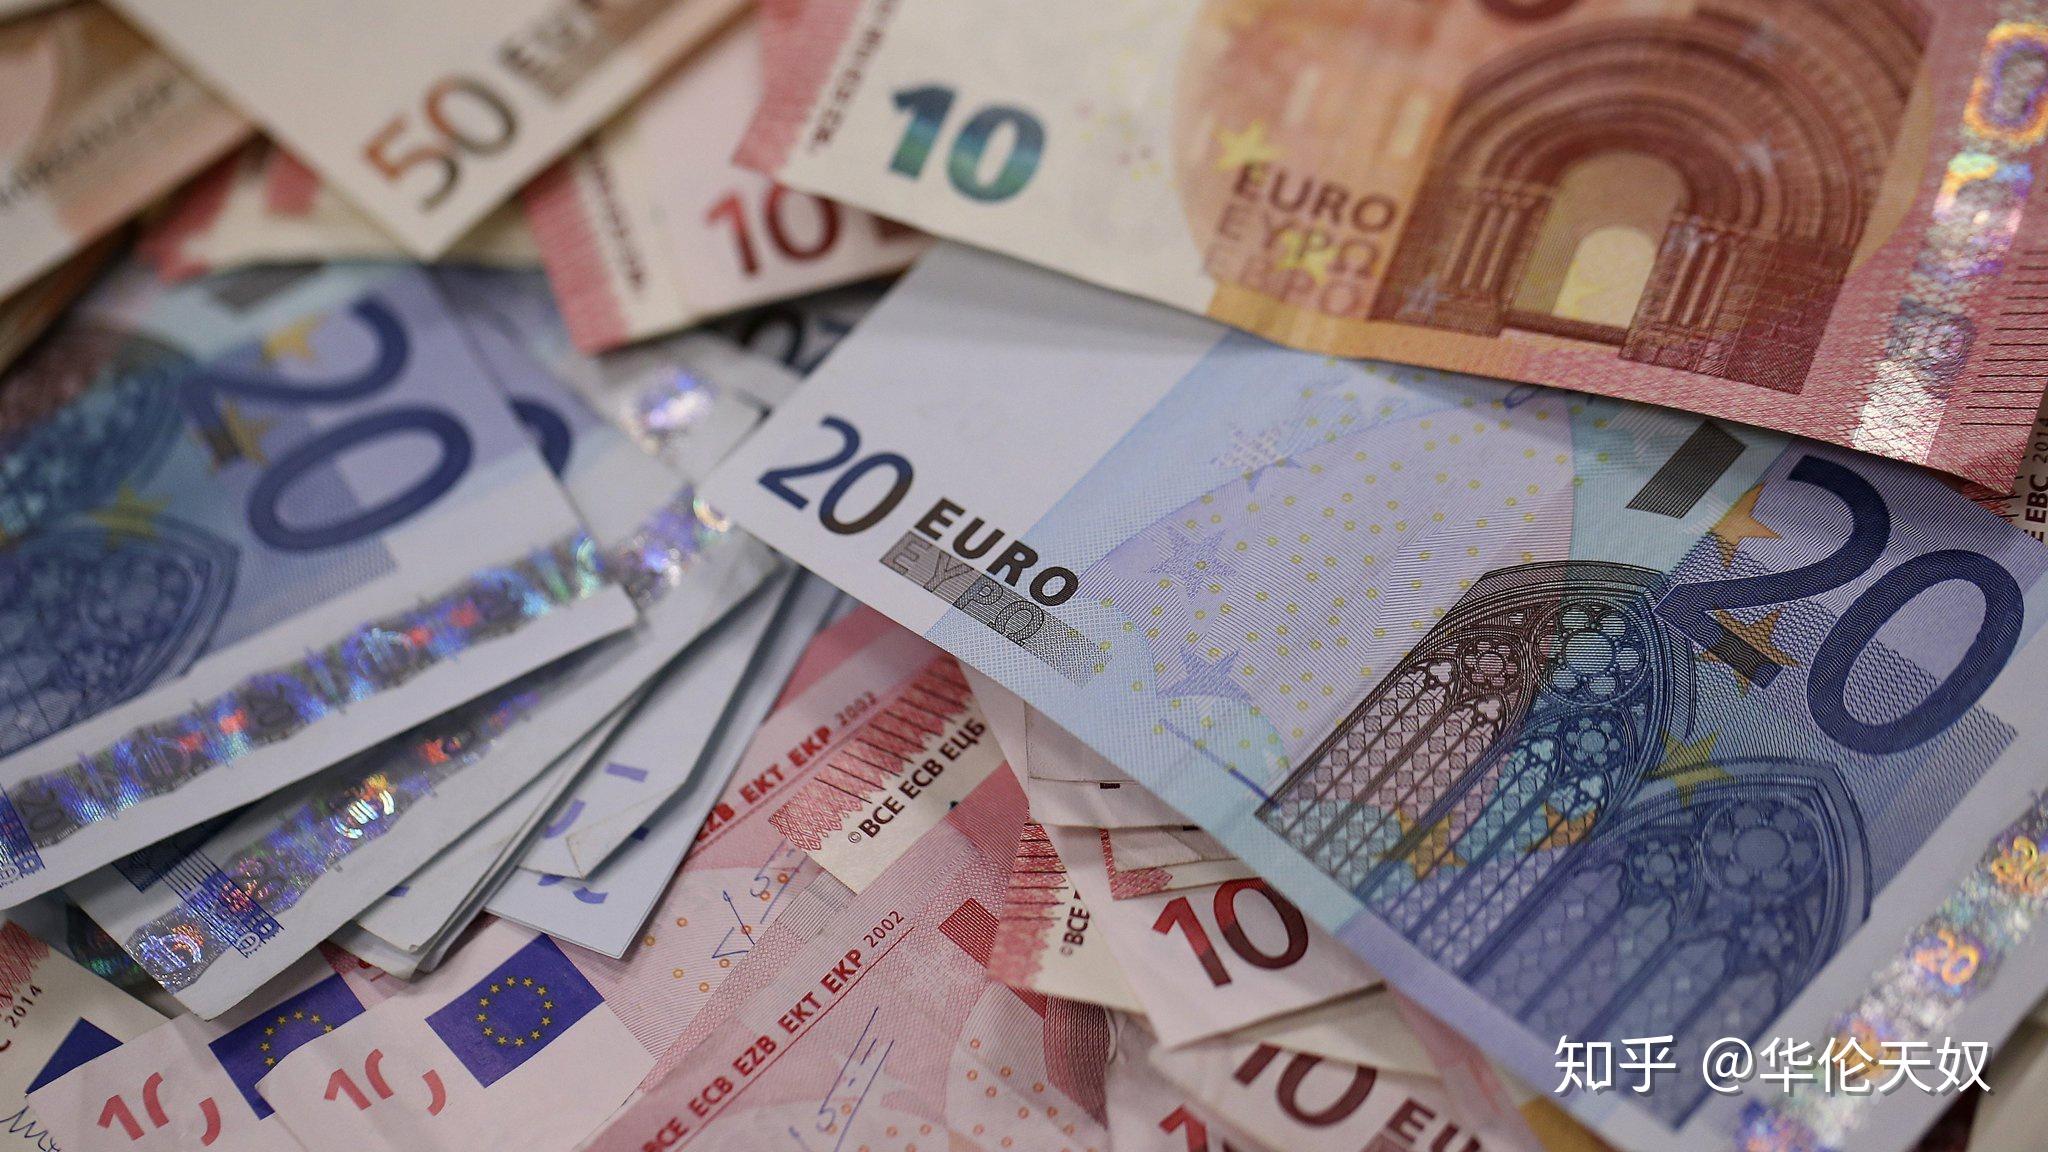 Free Images : europe, italy, material, cash, currency, finance, banknote, dollar bill, paper ...